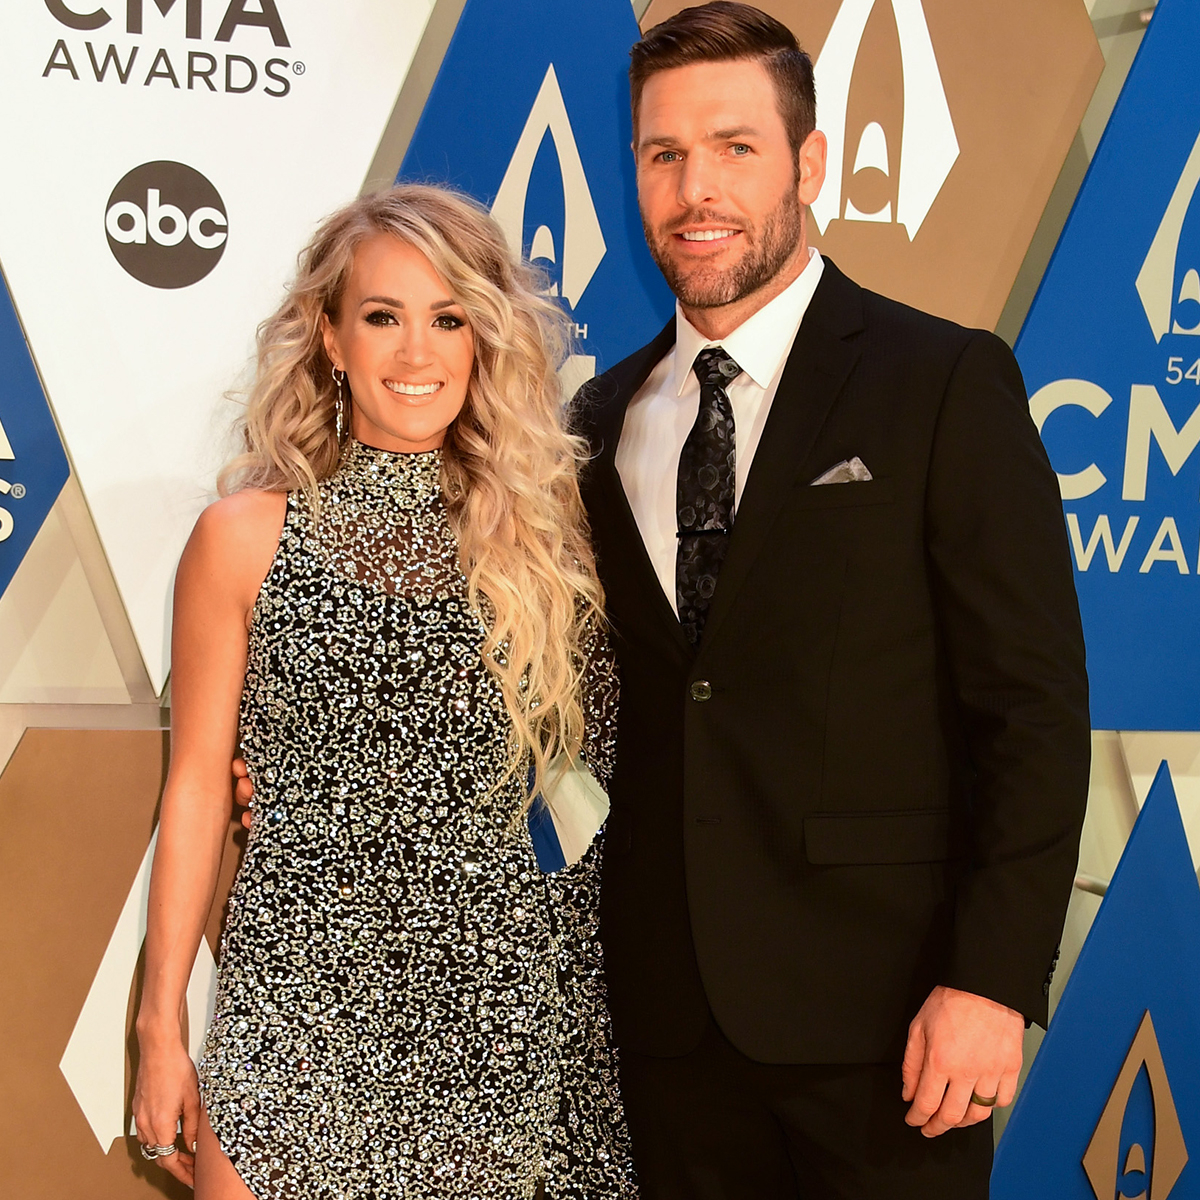 Mike Fisher does Carpool Karaoke on Wife Carrie Underwood's “Cry